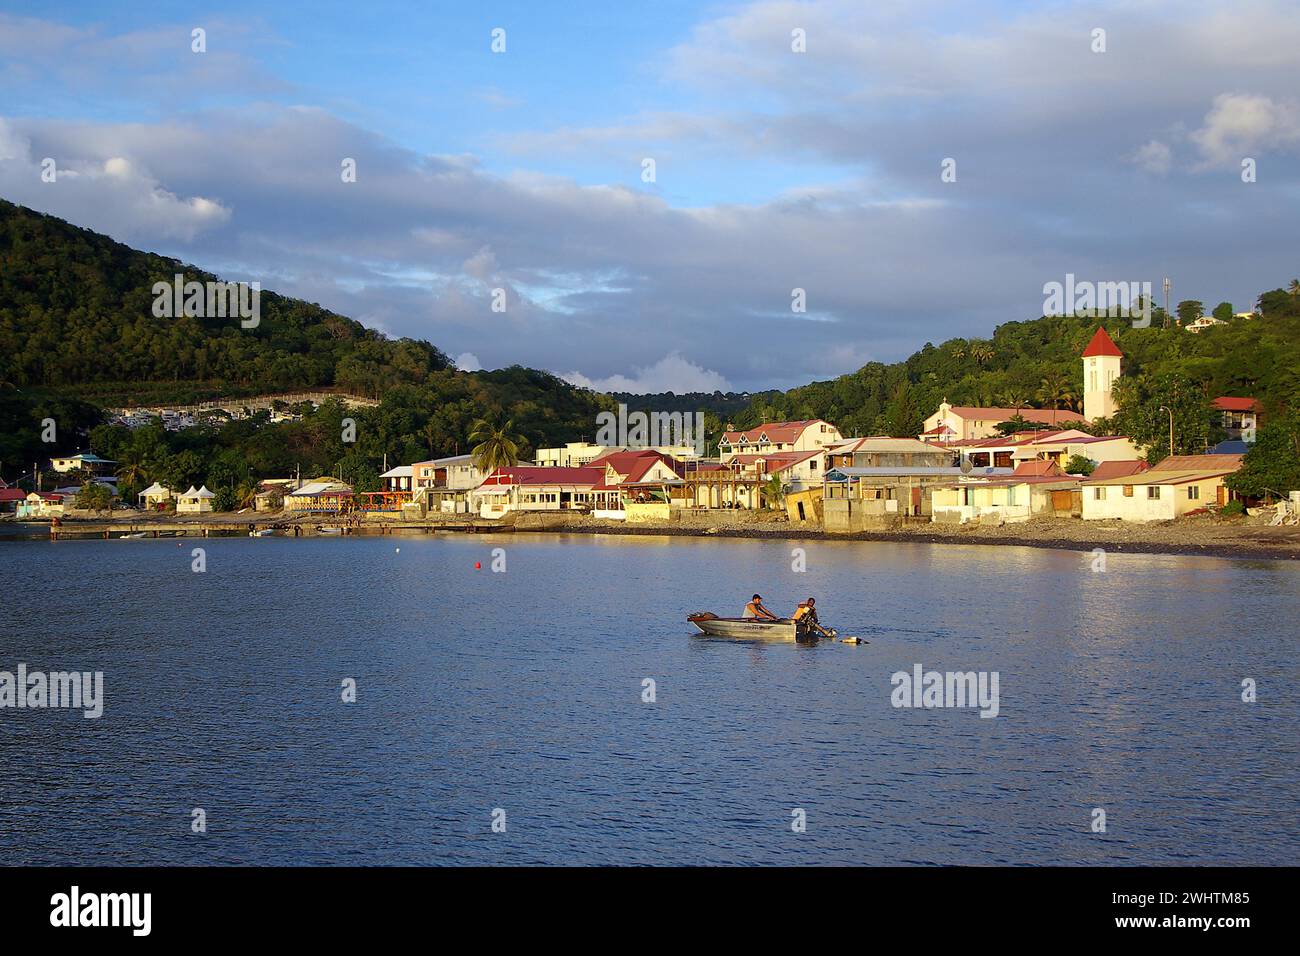 Caribbean, French Antilles, Guadeloupe, Basse-Terre, View of the village of Deshaies with harbour basin Stock Photo